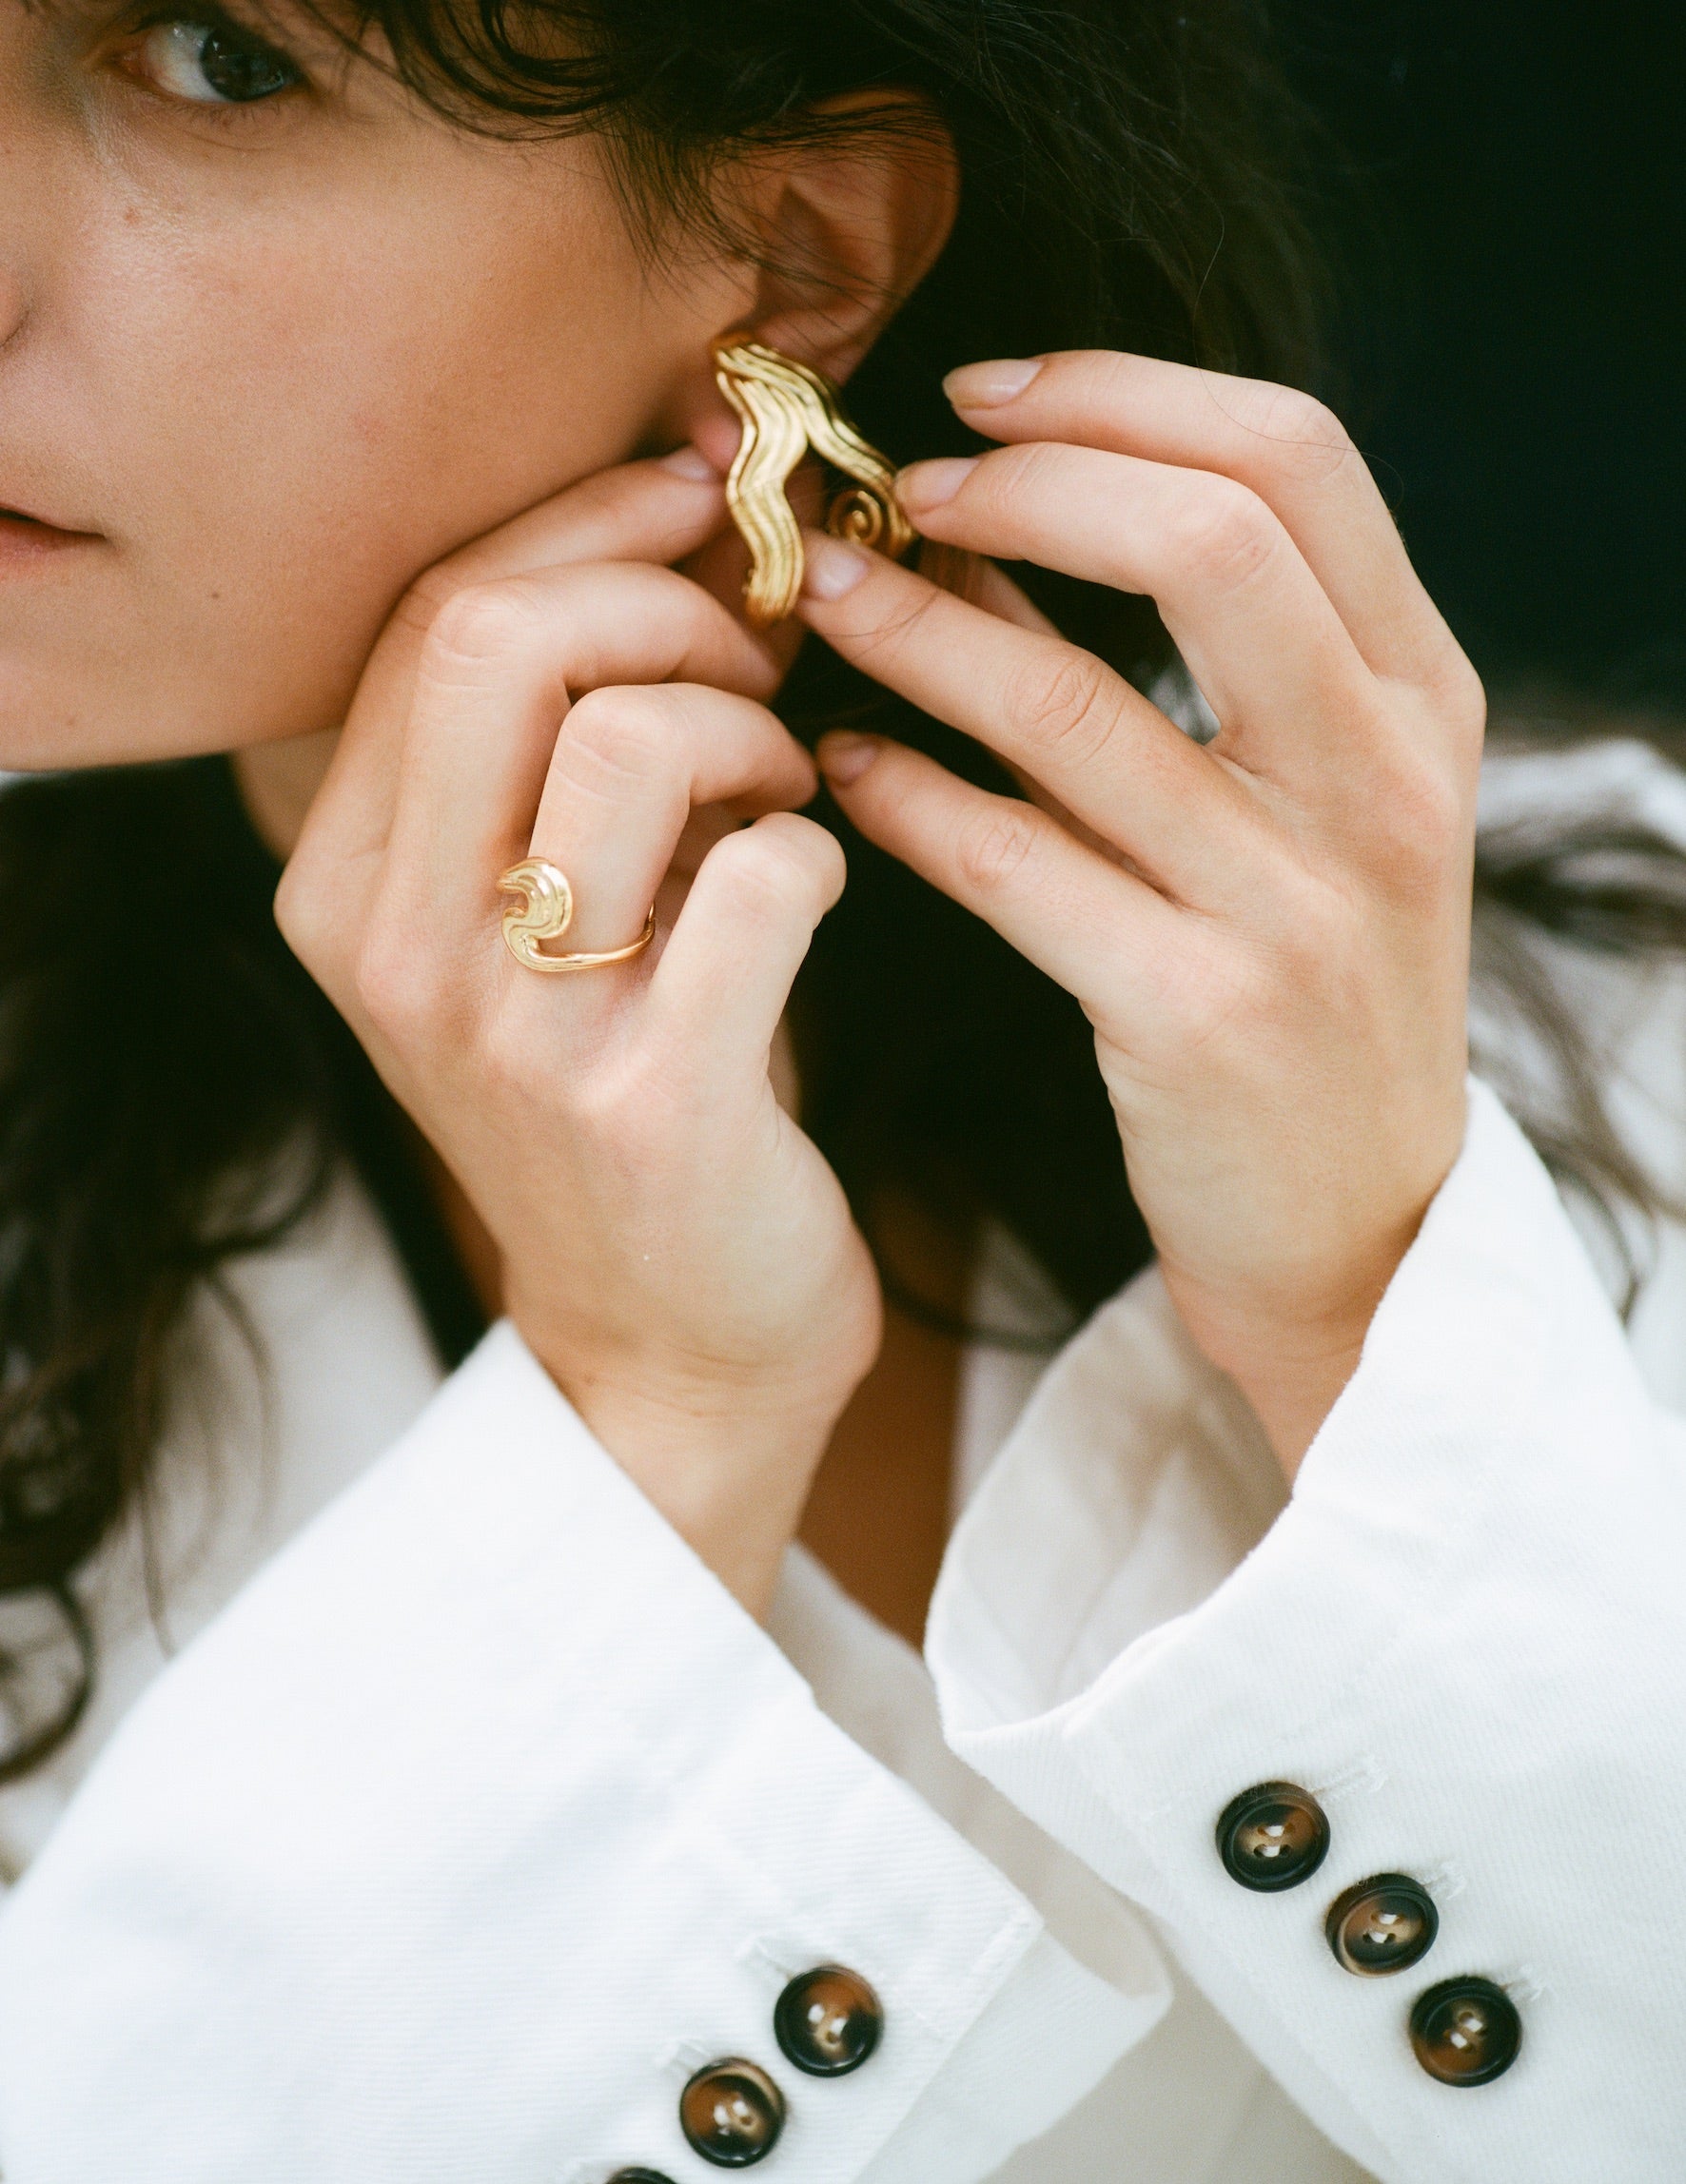 Model wearing wavy gold earrings, touching them with both hands